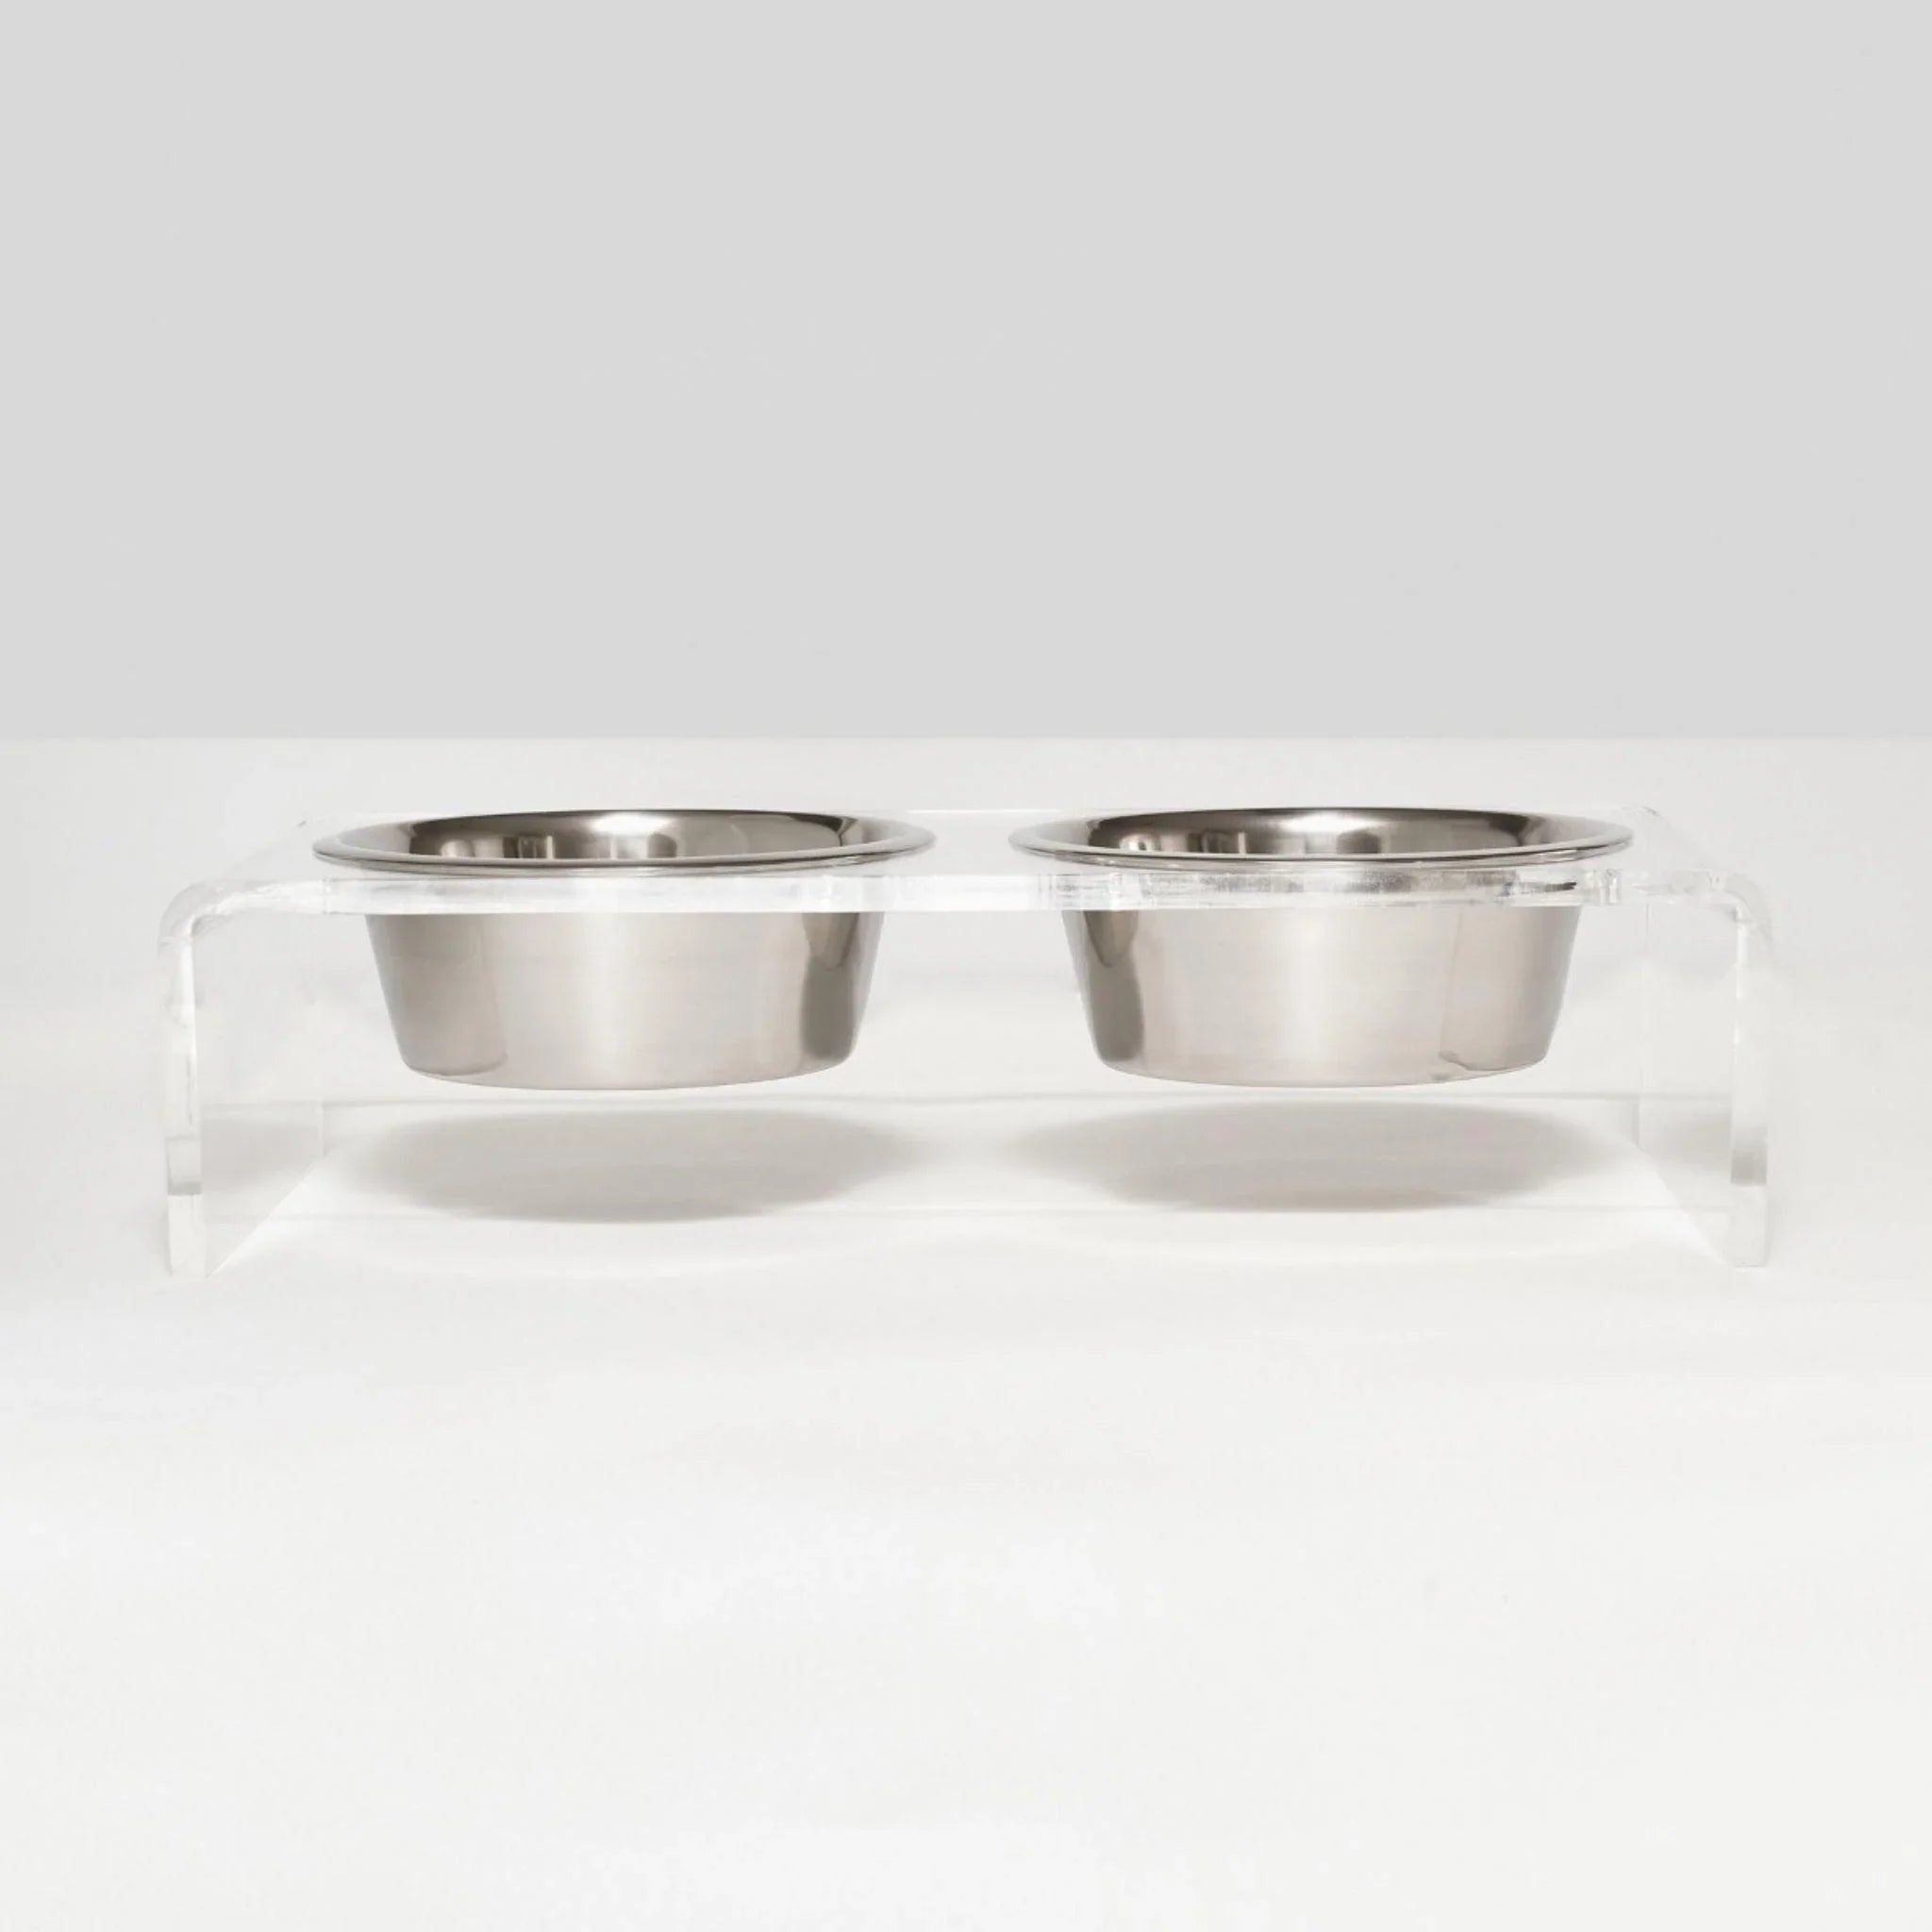 Hiddin Medium Clear Double Pet Bowl Feeder with Silver Bowls | options 3.5 Cups